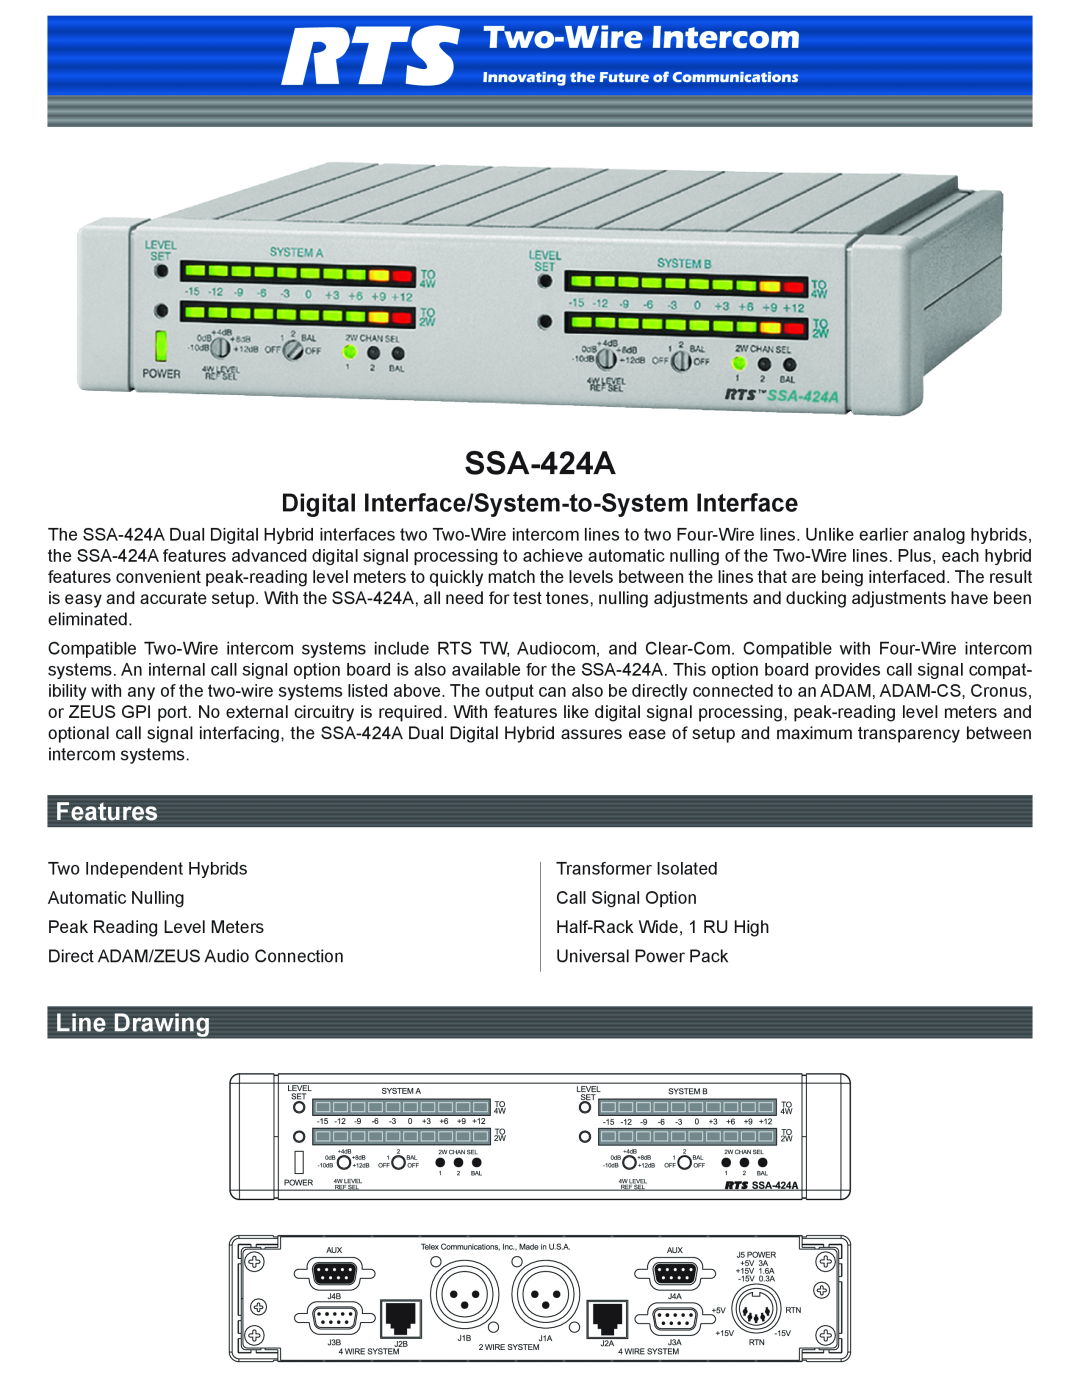 RTS SSA-424A manual Digital Interface/System-to-System Interface, Features, Line Drawing 